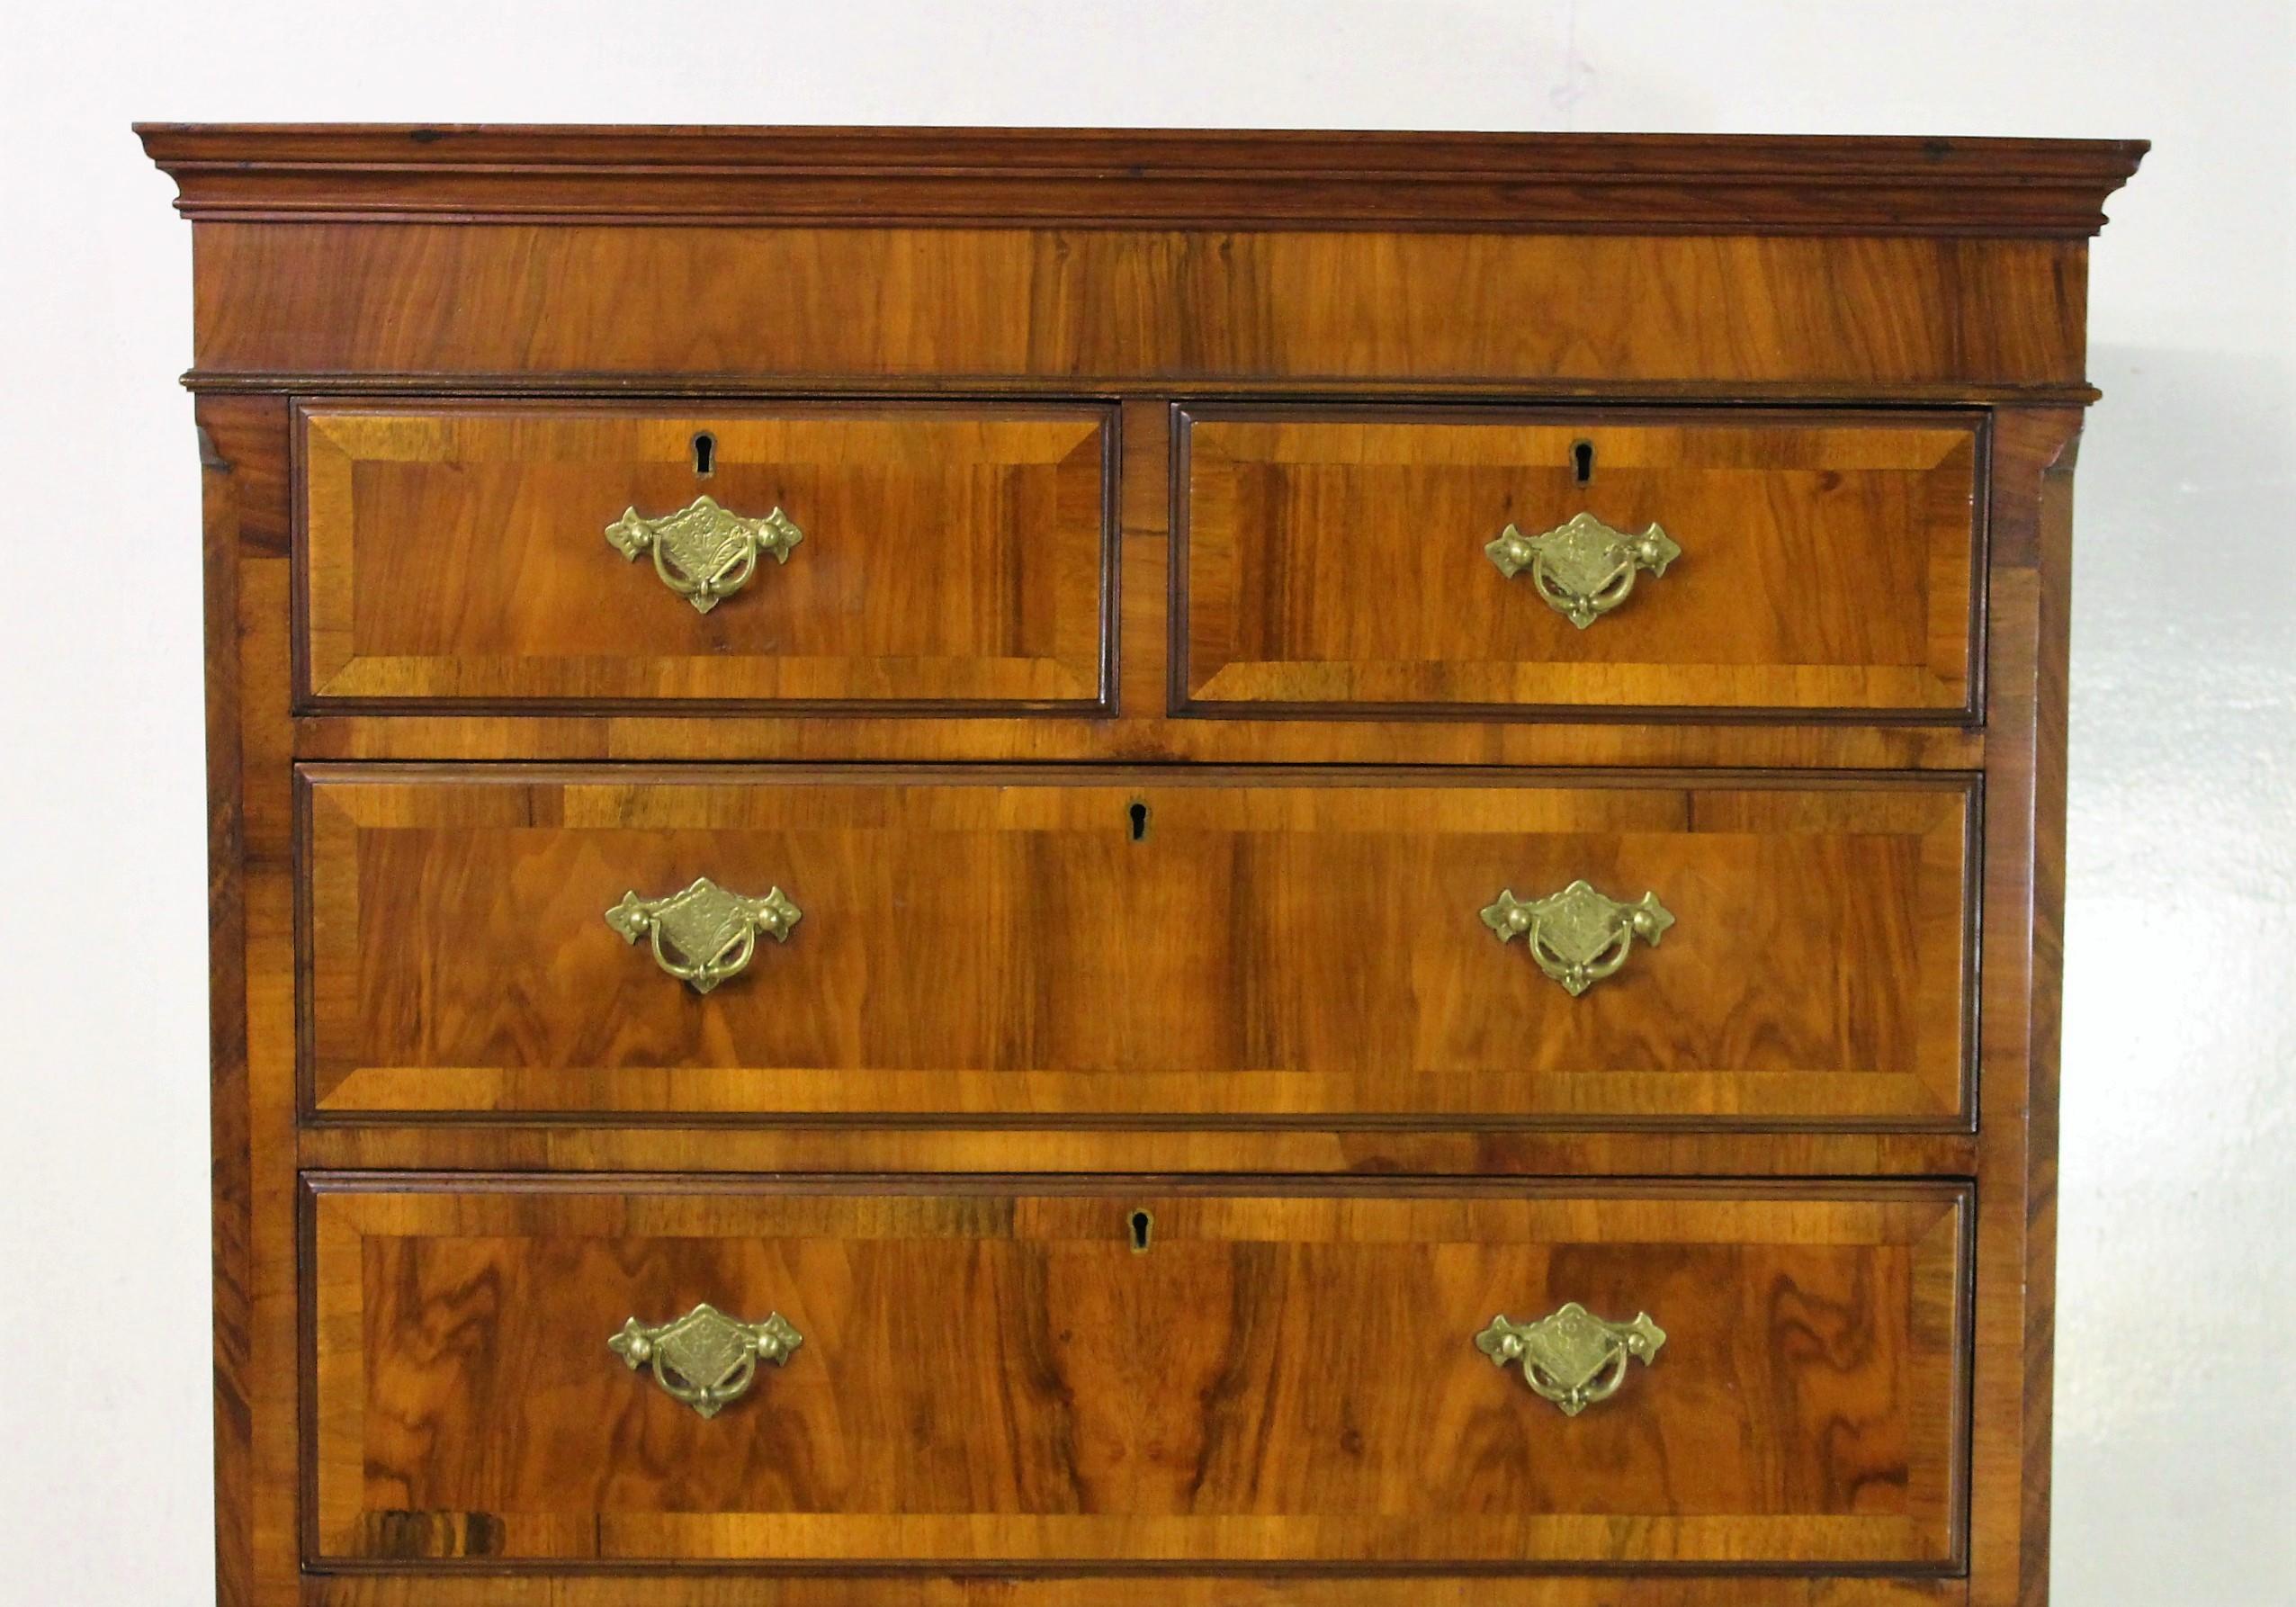 A splendid burr walnut chest on chest, or tallboy, in the early Georgian style. Well constructed in solid walnut with attractive burr walnut veneers onto an oak carcas. The top section with canted corners and an arrangement of 2 short over 3 long